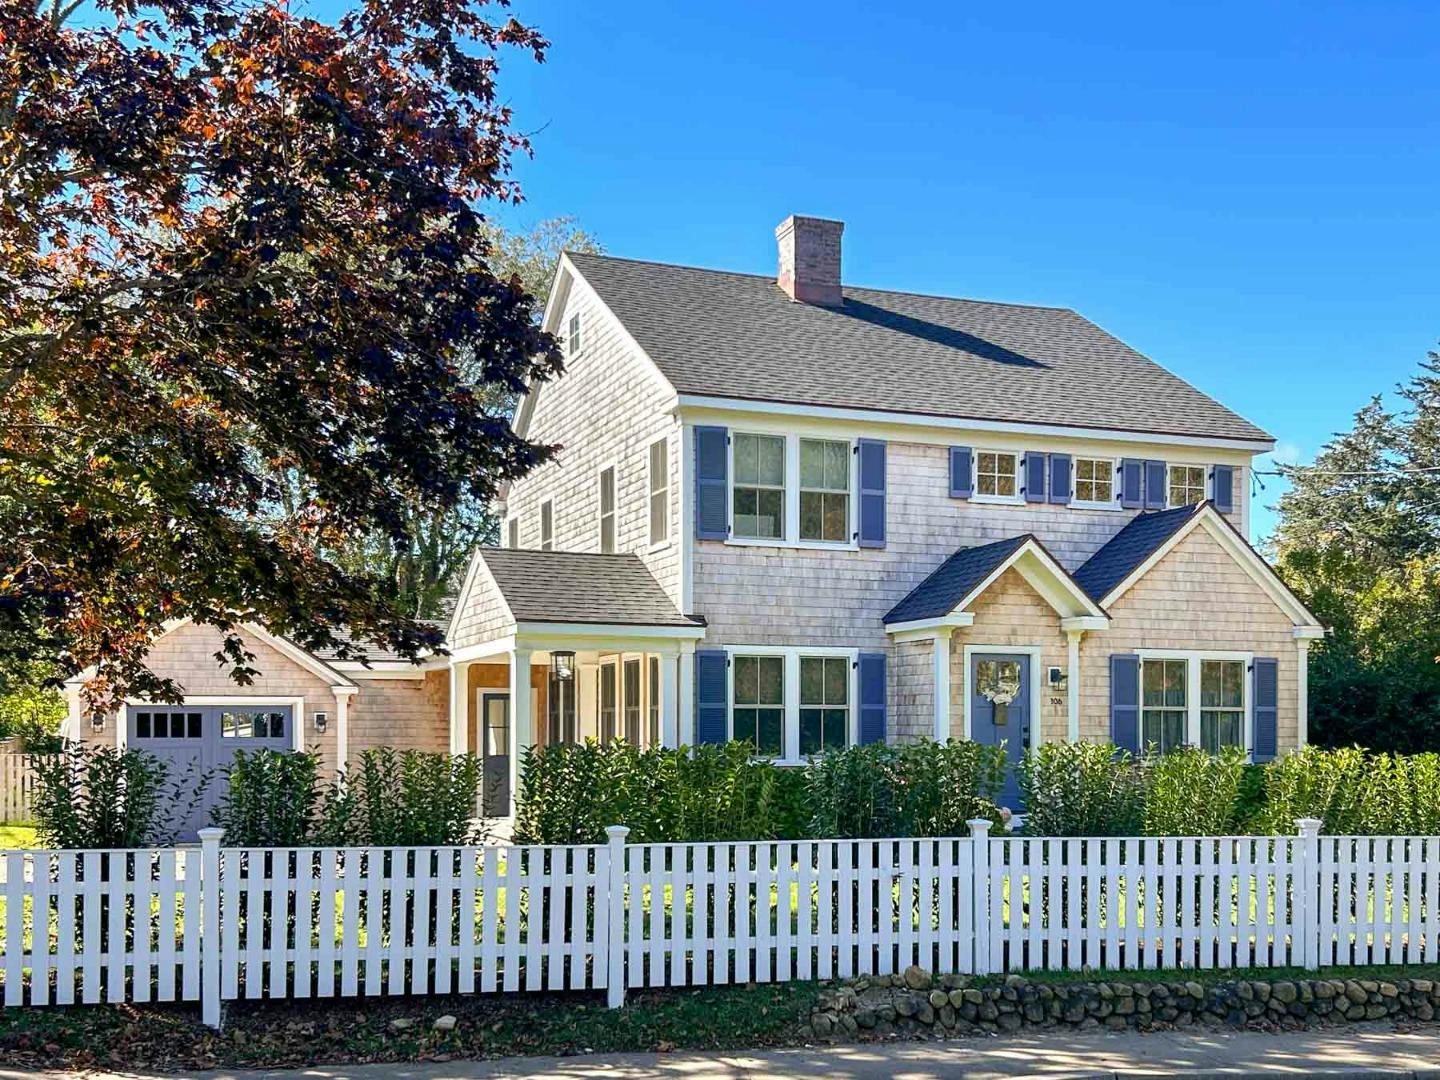 106-peases-point-way-south-edgartown-ma-02539-41364